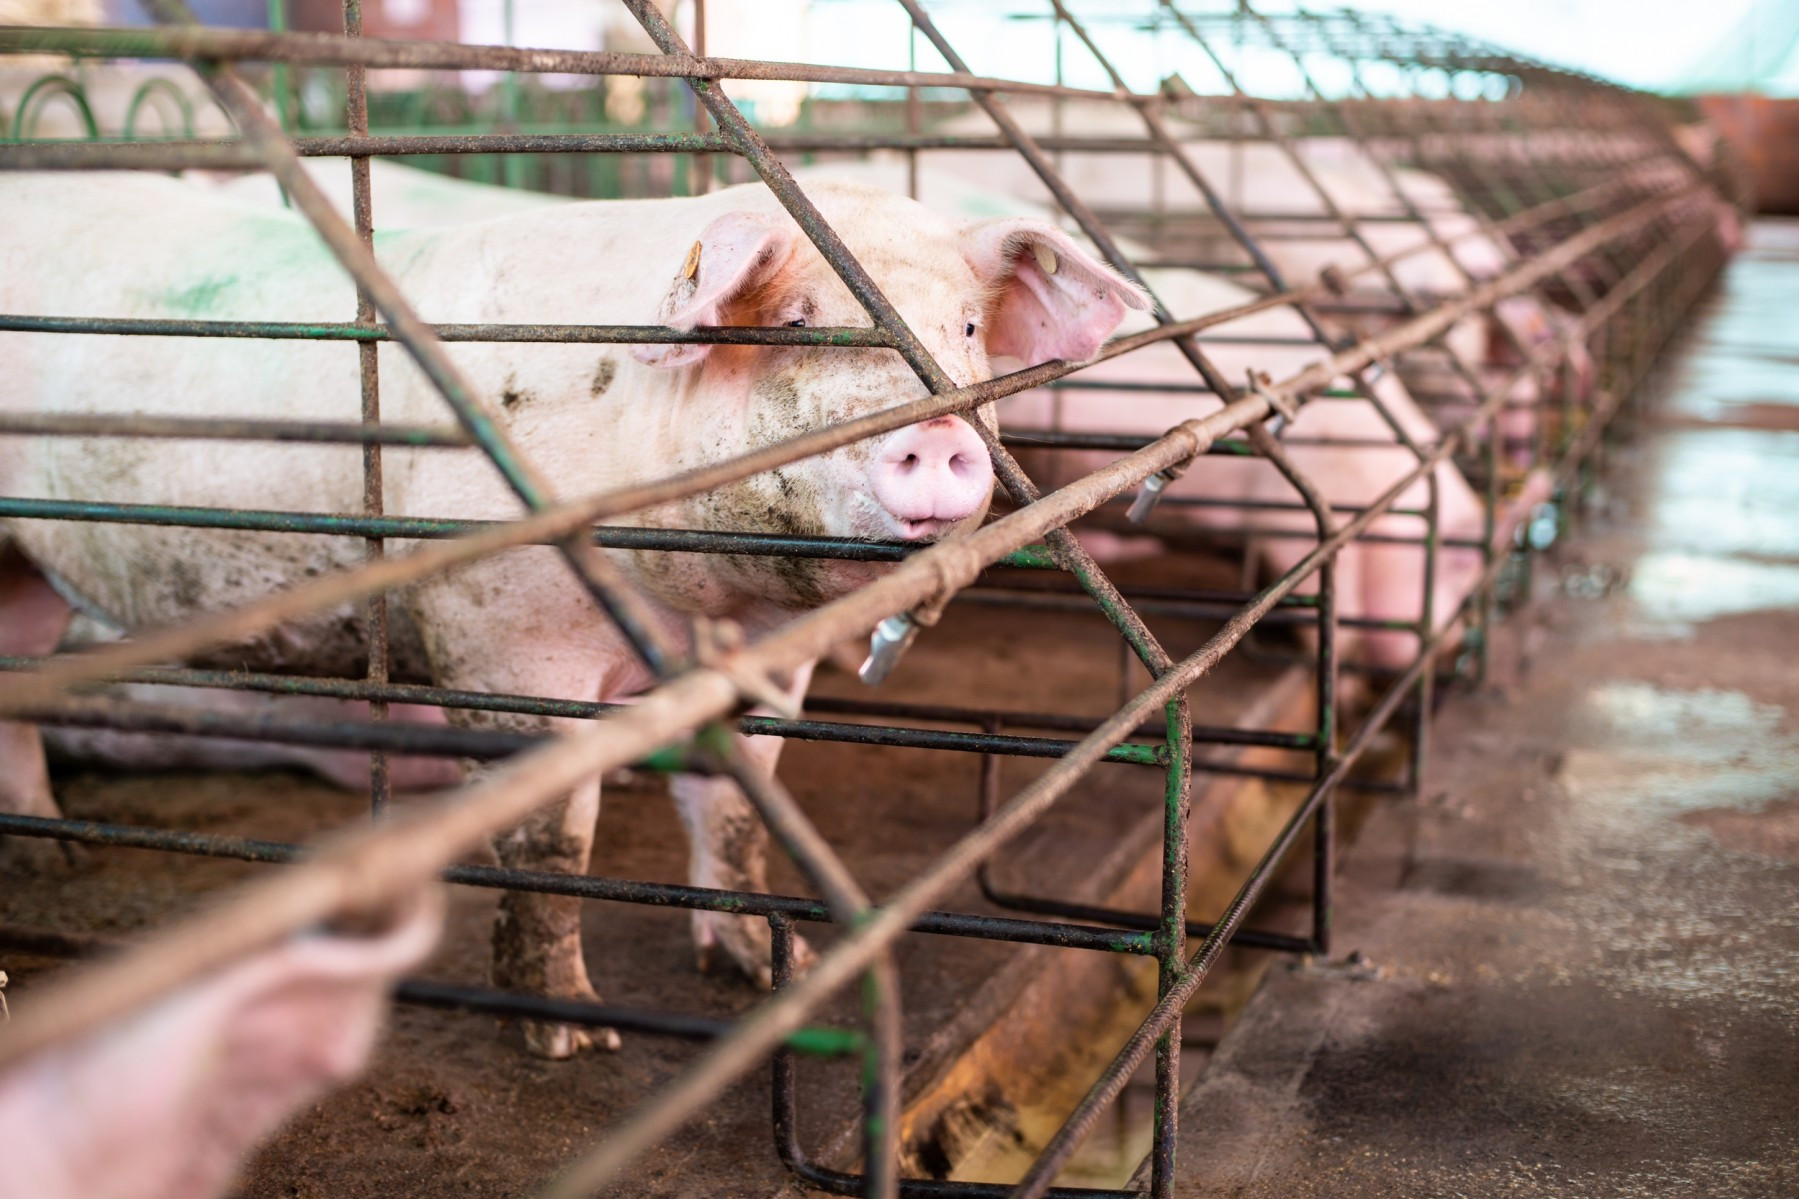 Pig looking through cage on factory farm - World Animal Protection - Animals in farming